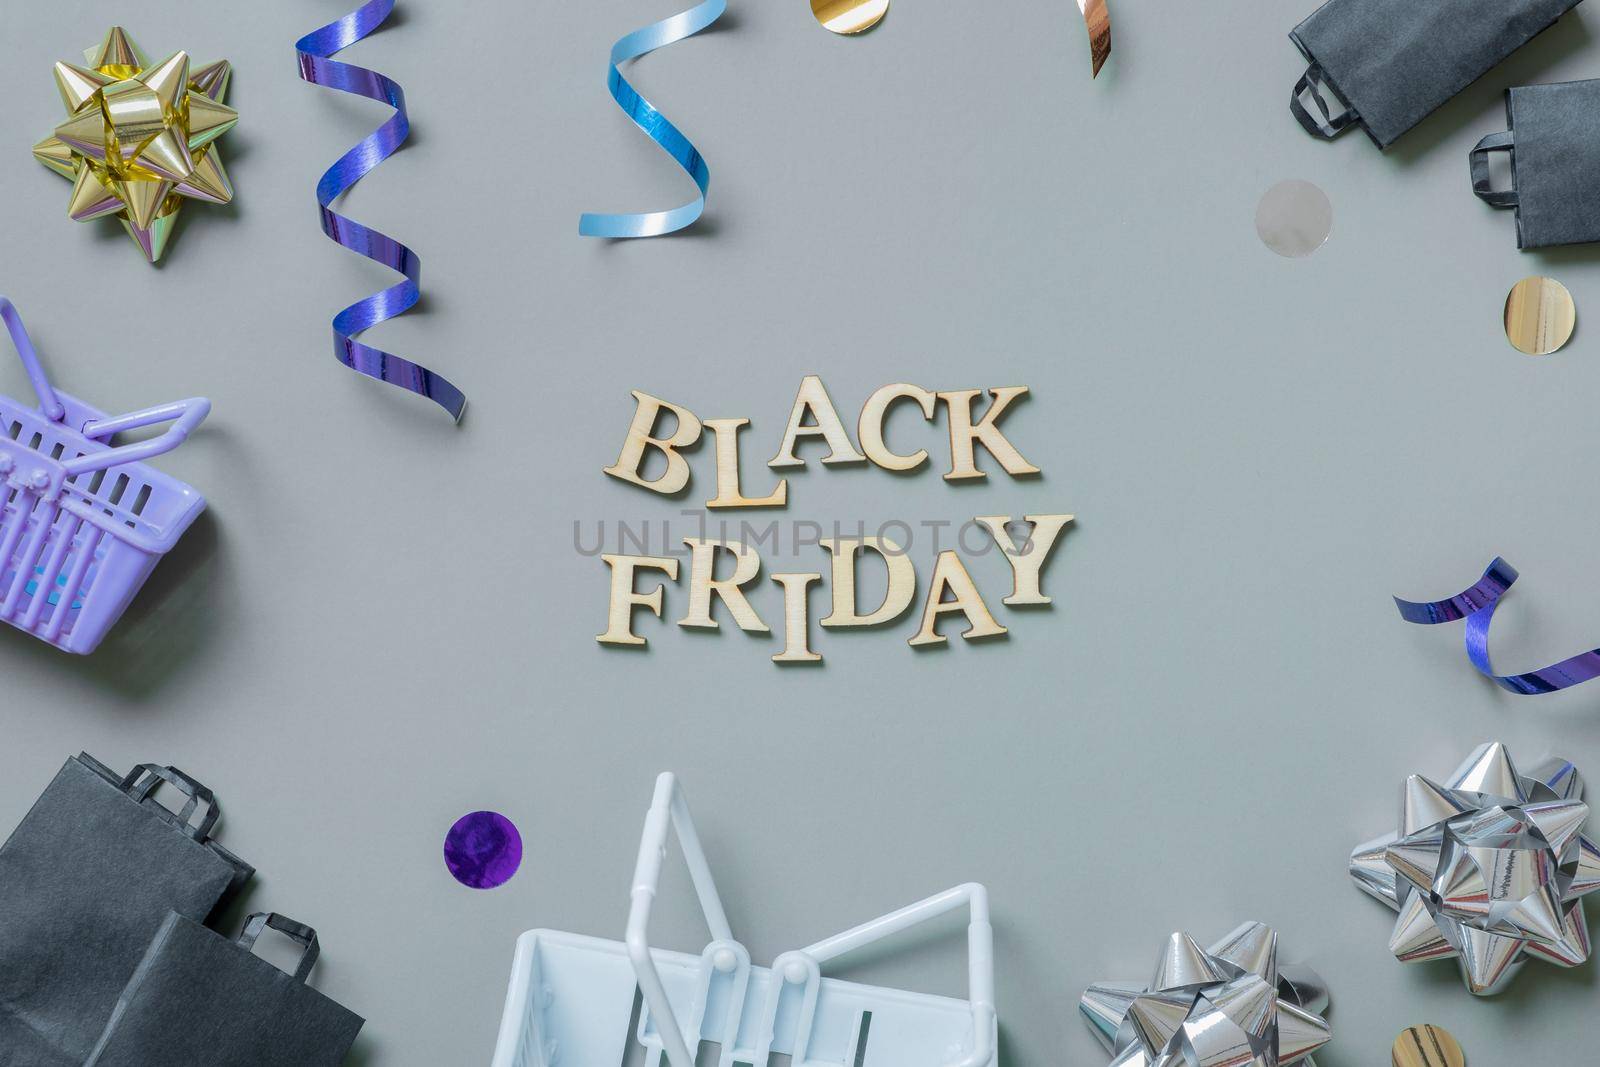 Black friday text with gifts, shopping baskets and festive tinsel flat lay by ssvimaliss